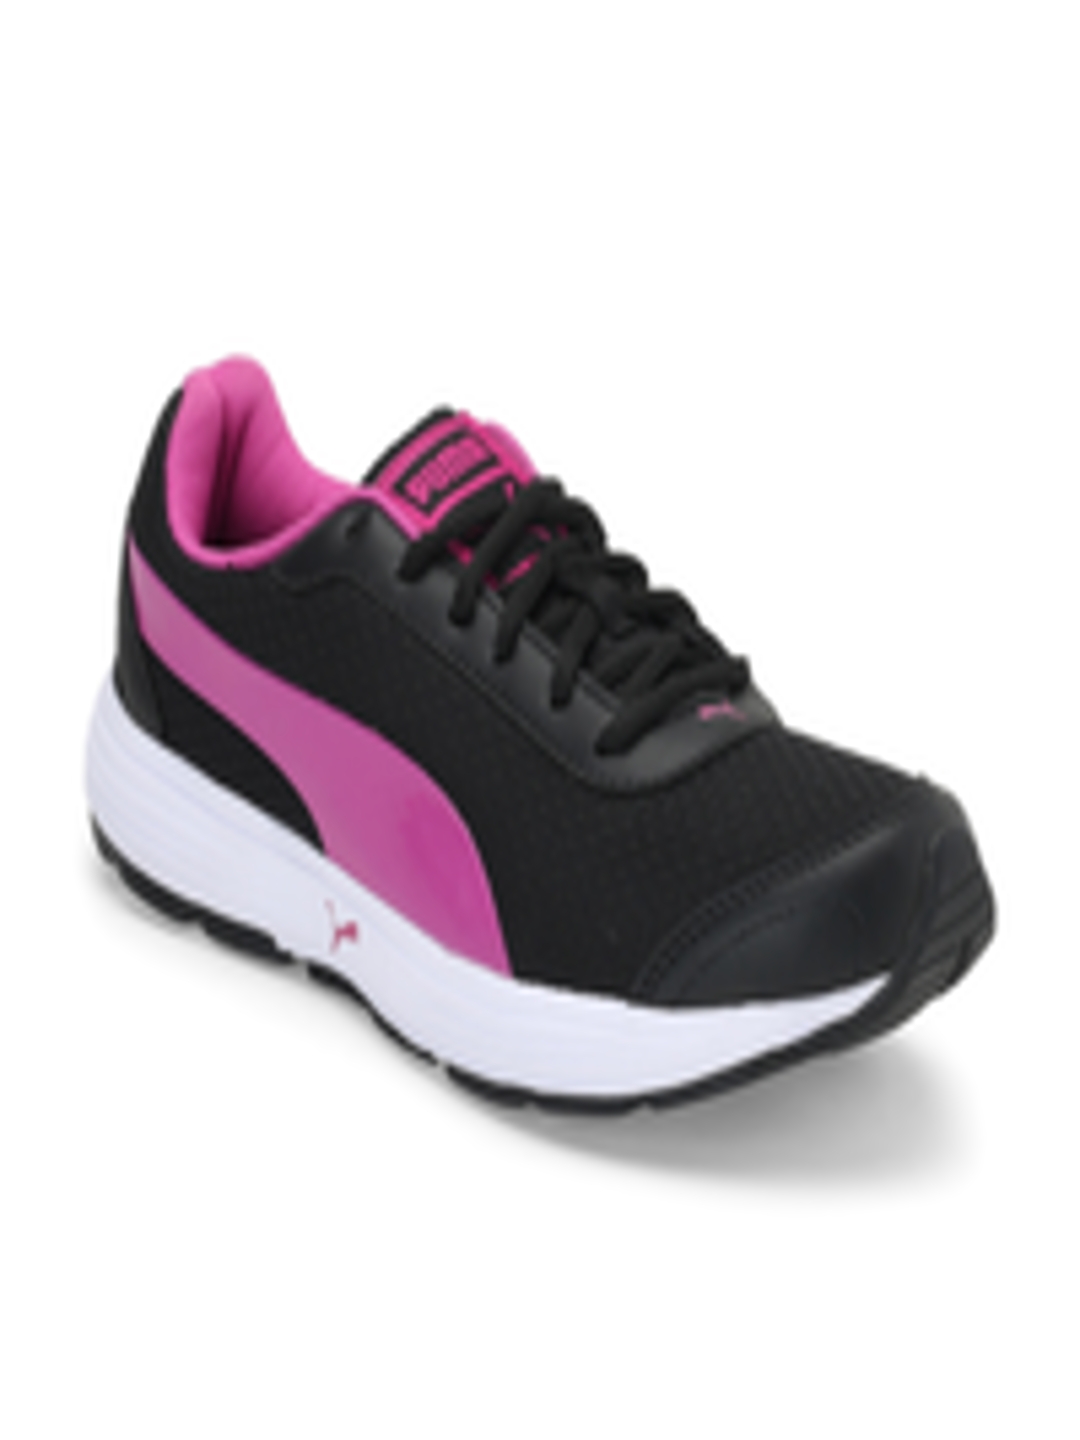 Buy Puma Women Black & Pink Reef Wns DP Running Shoes - Sports Shoes ...